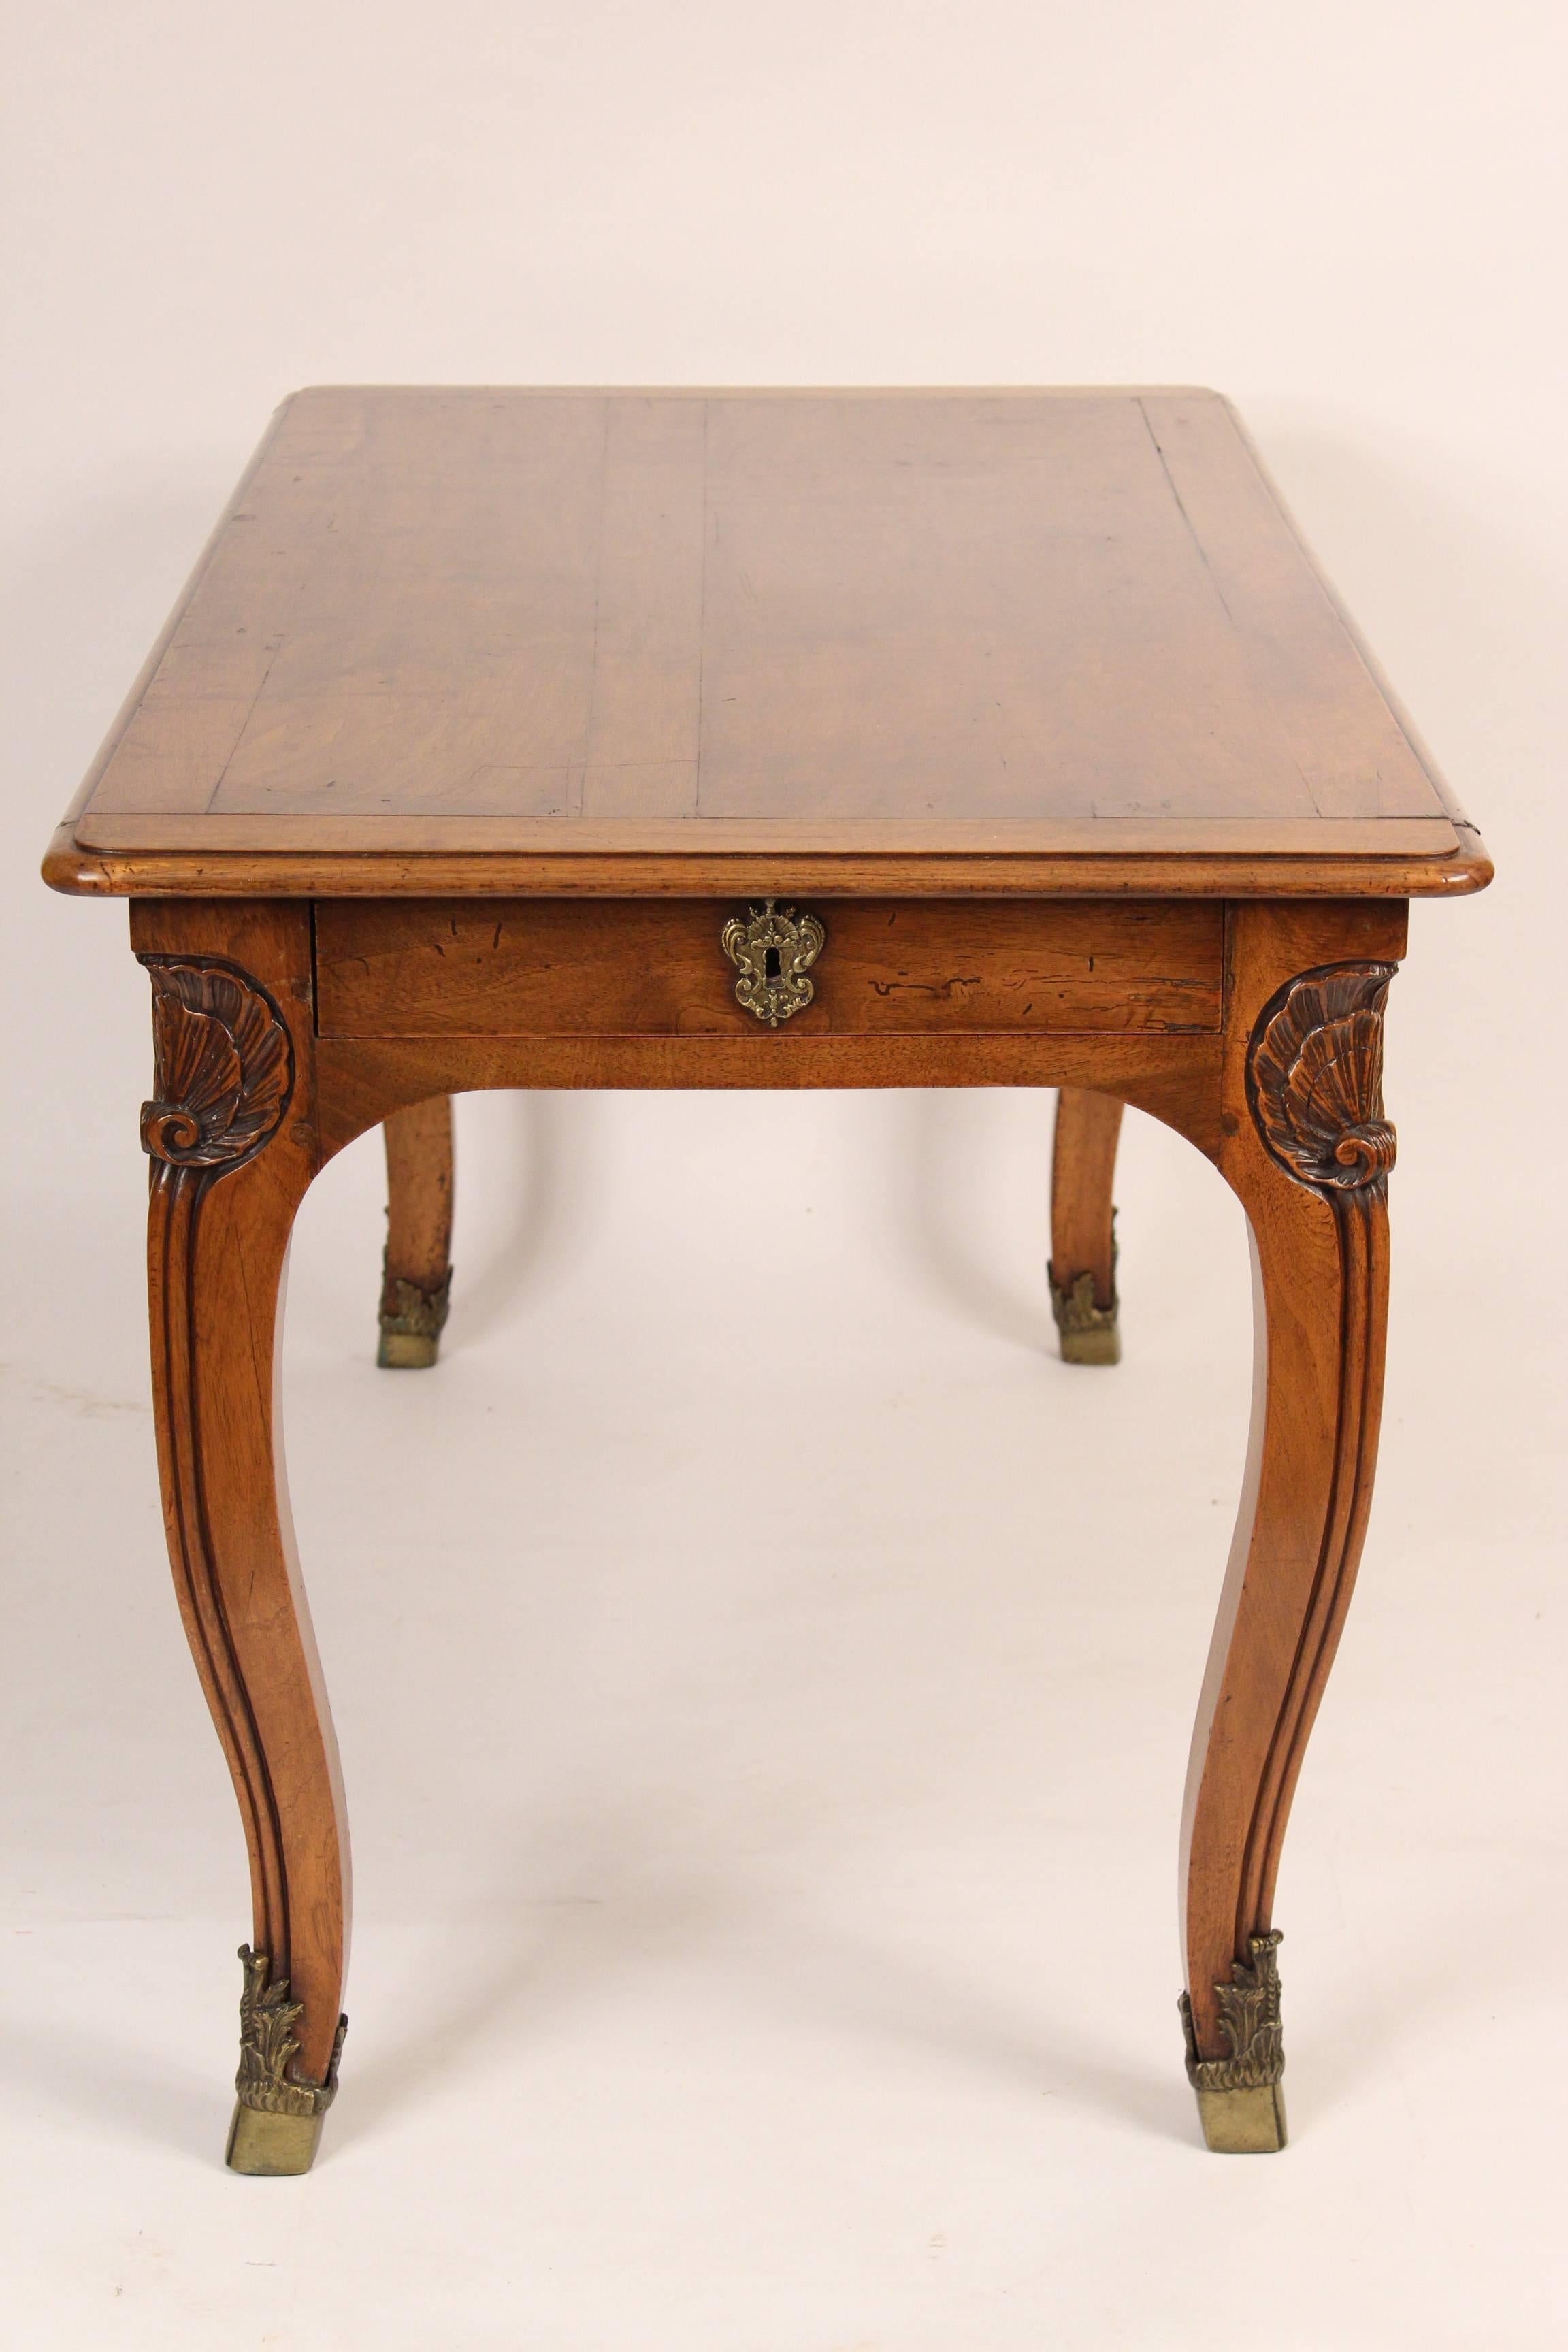 Louis XV Provincial style walnut writing table, circa 1890. This writing table features, shell carving on apron and legs, finely cast and chased bronze hoof form sabots. The drawers are on either end of the writing table. The distance from the